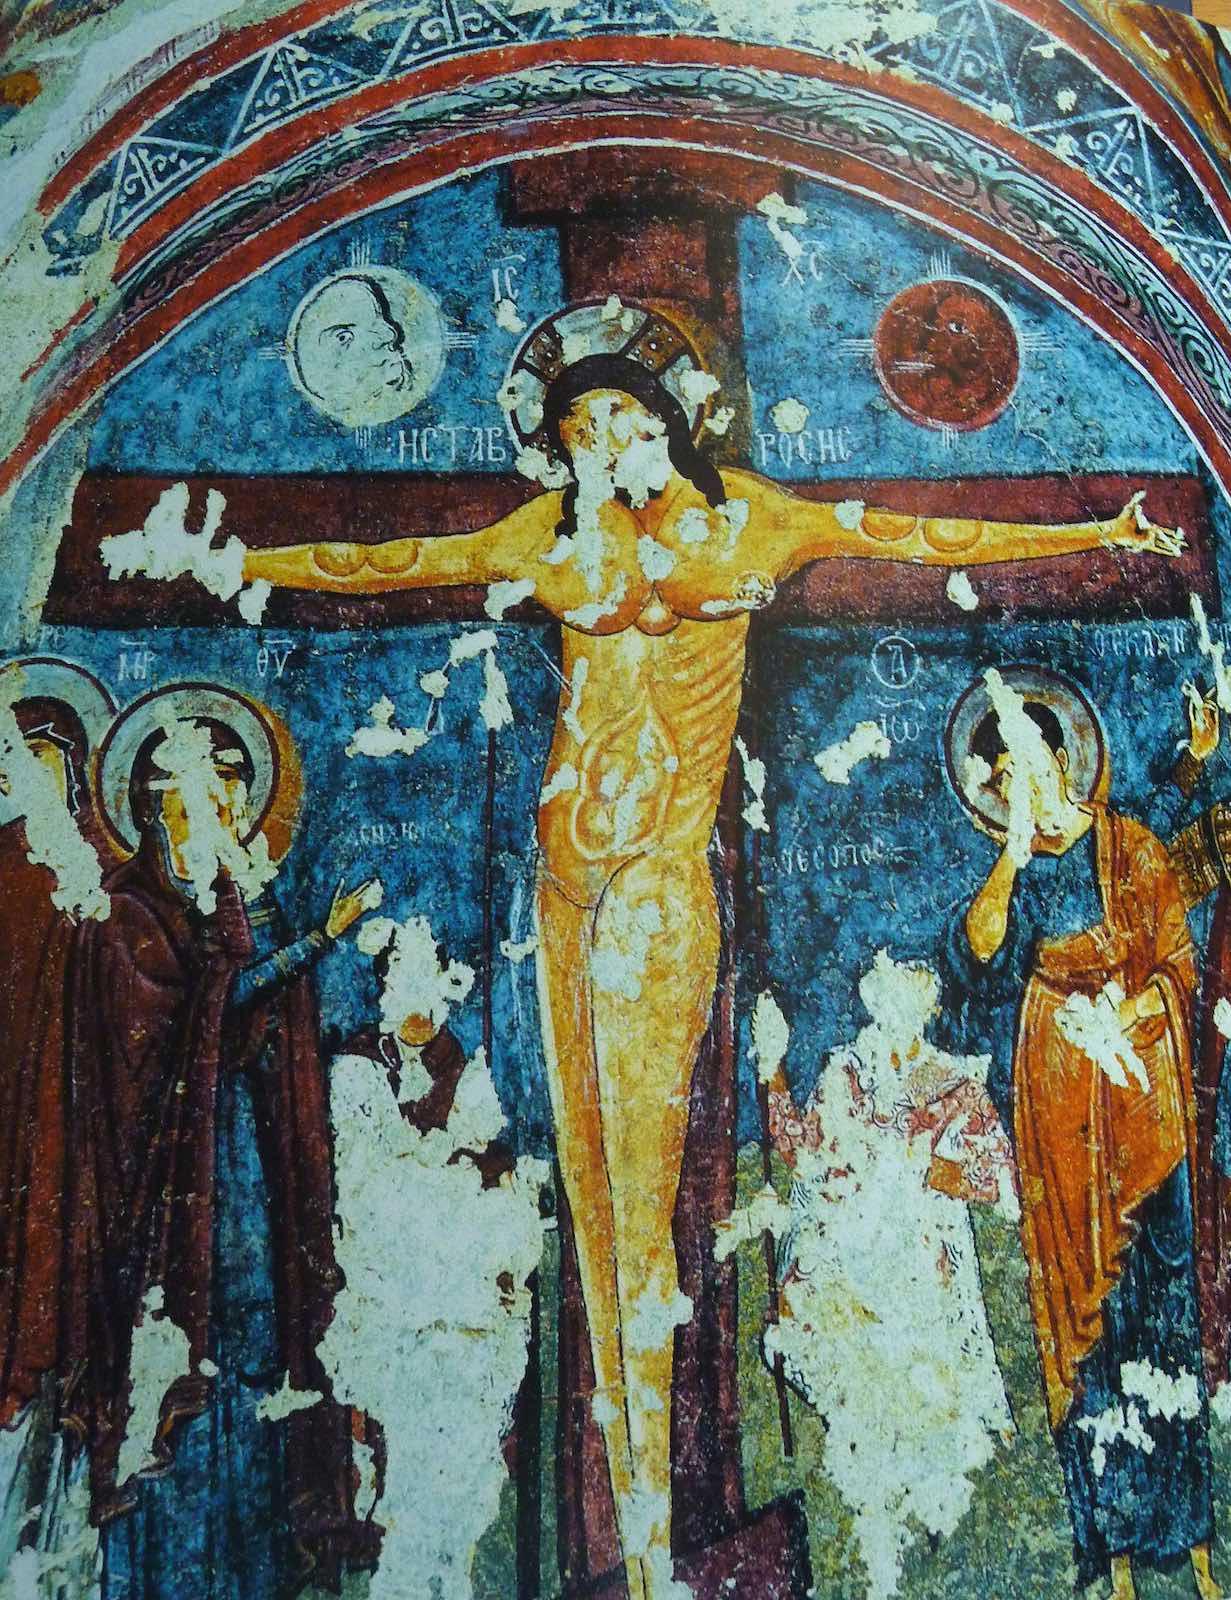 Fresco from the rock-hewn Sandals Church (or Carikli Kilise). Primarily blue and yellow Merrill of Jesus on the cross